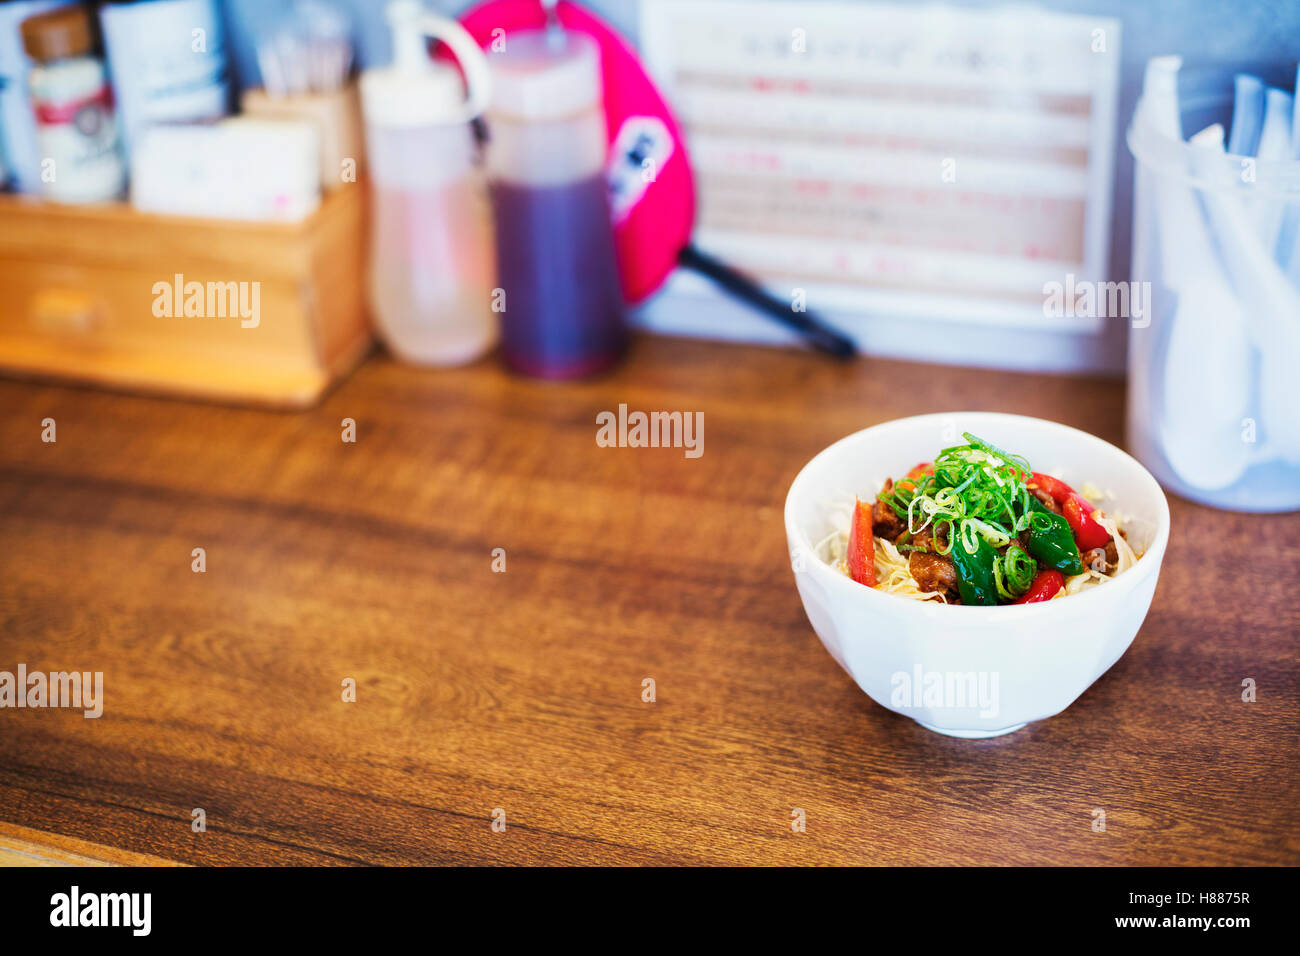 A ramen noodle shop. A bowl of fresh made ramen noodles with vegetables and meat. Stock Photo